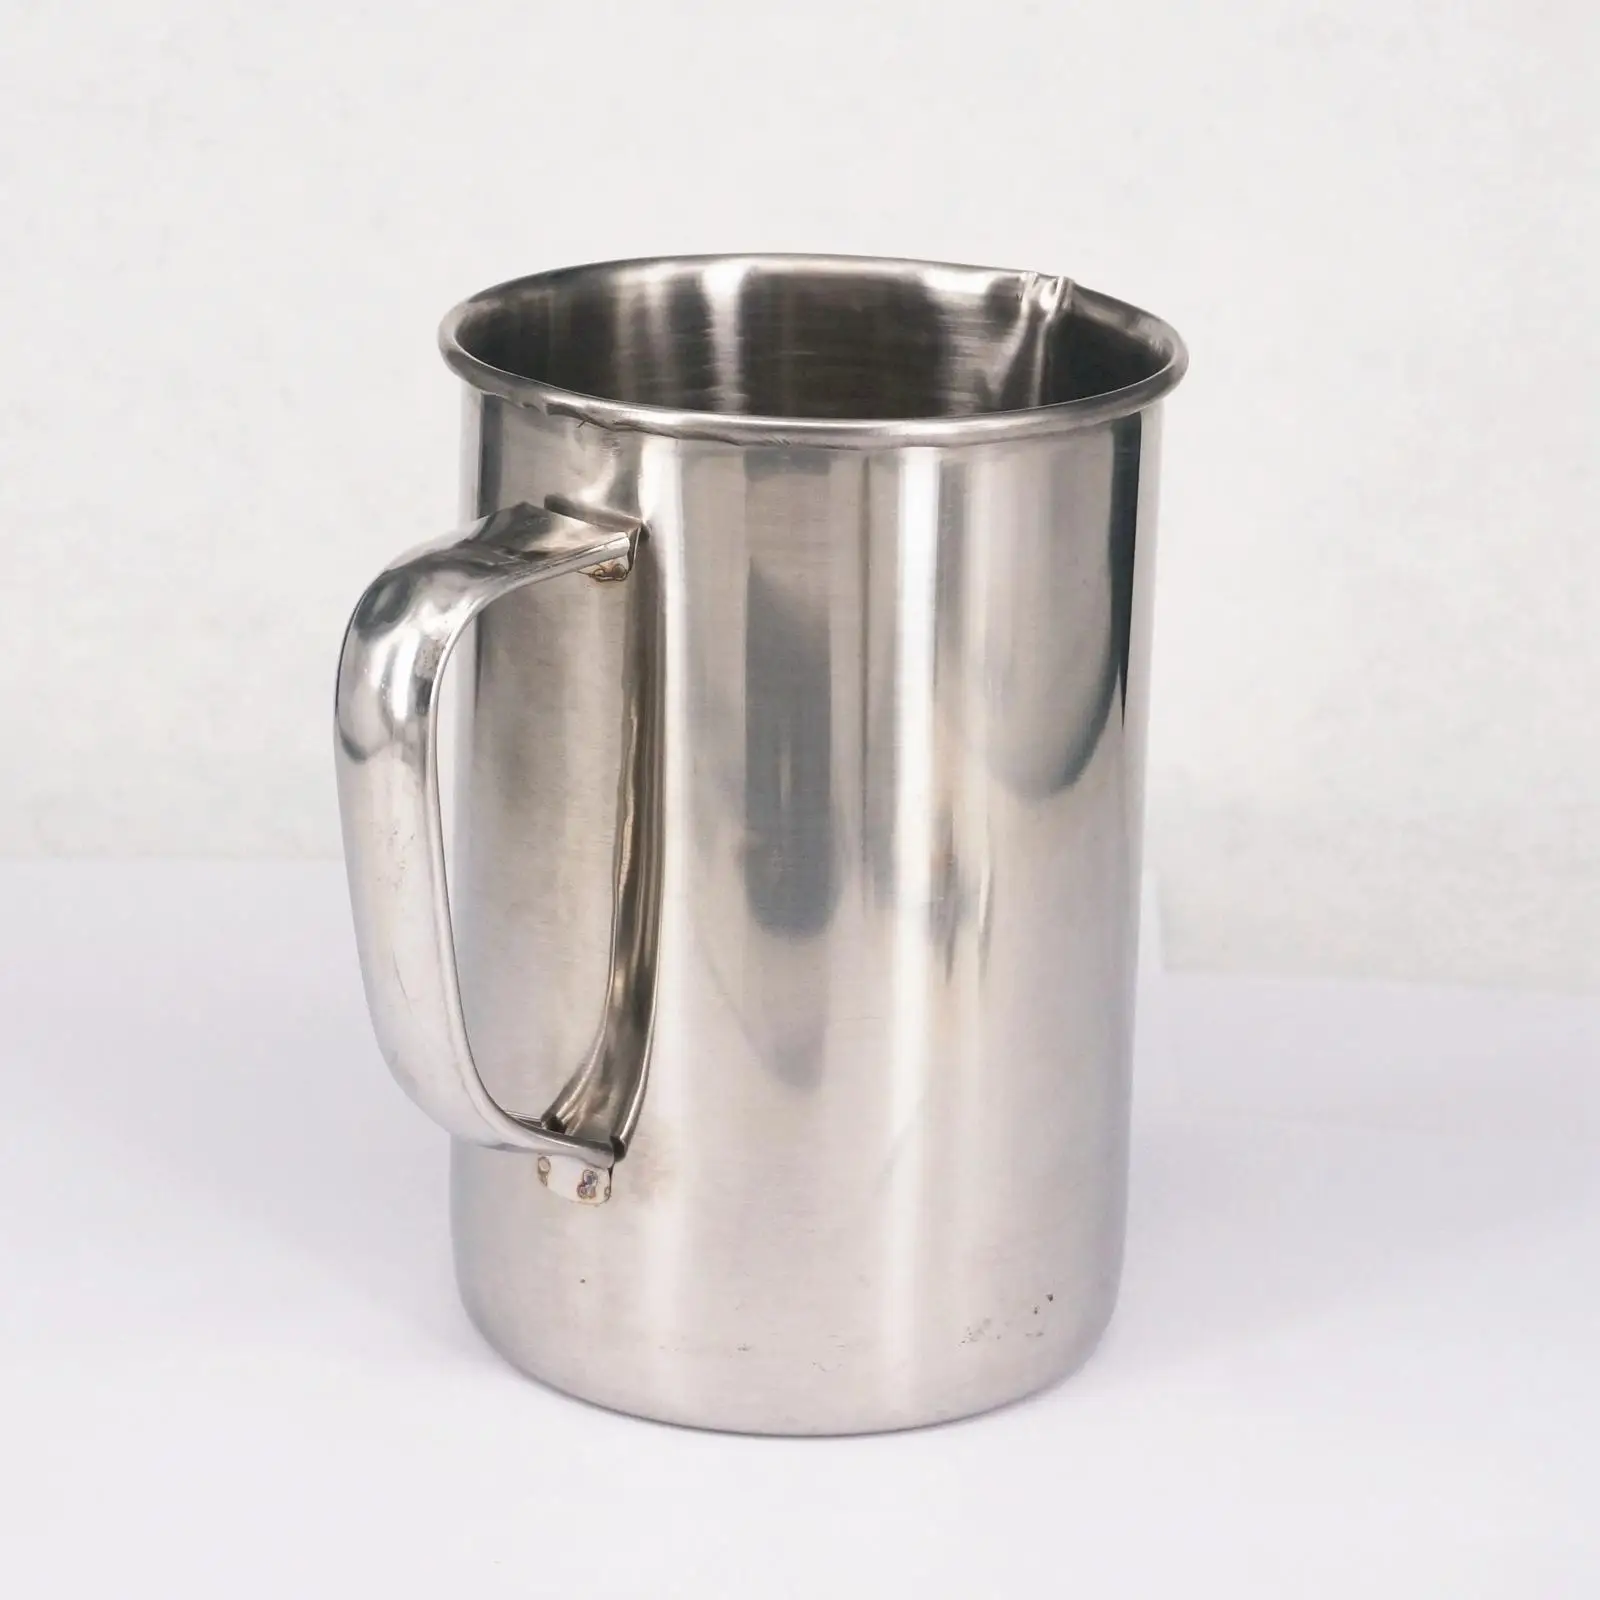 

1000ml Chemistry Laboratory Stainless Steel Measuring Beaker Cup With Pour Spout